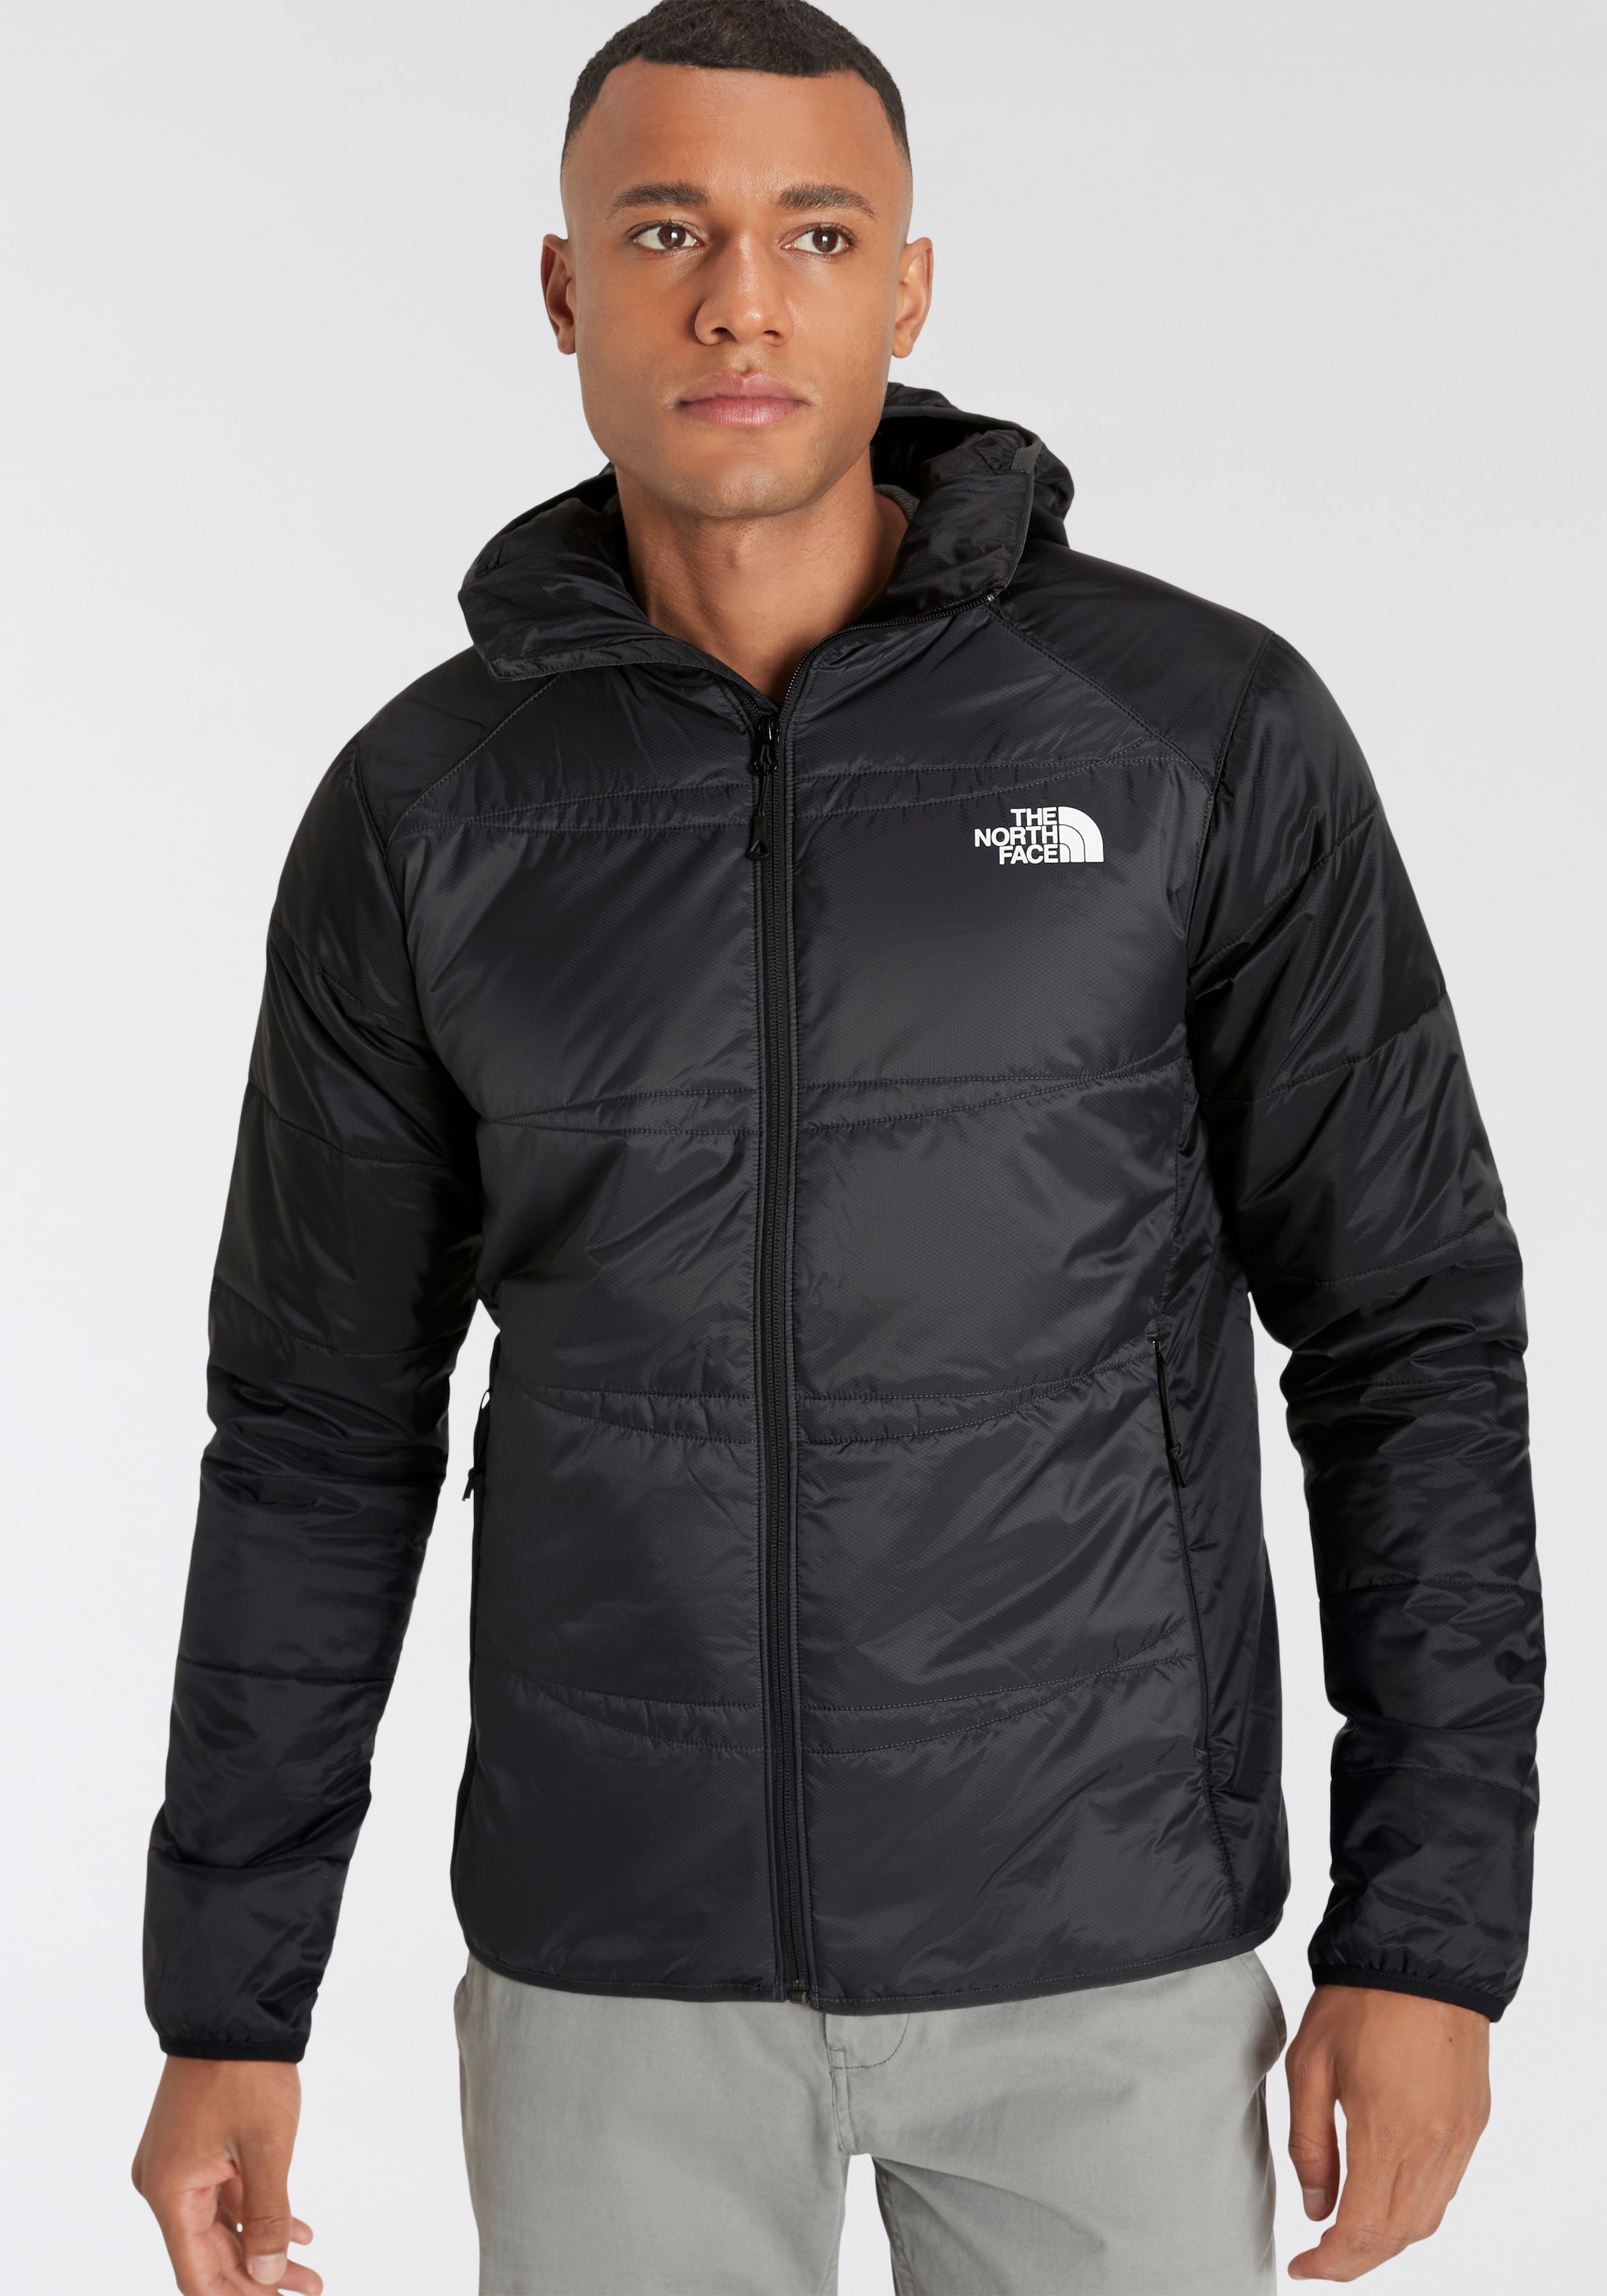 North »M mit SYNTHETIC Funktionsjacke JACKET«, bei Face QUEST Logodruck The